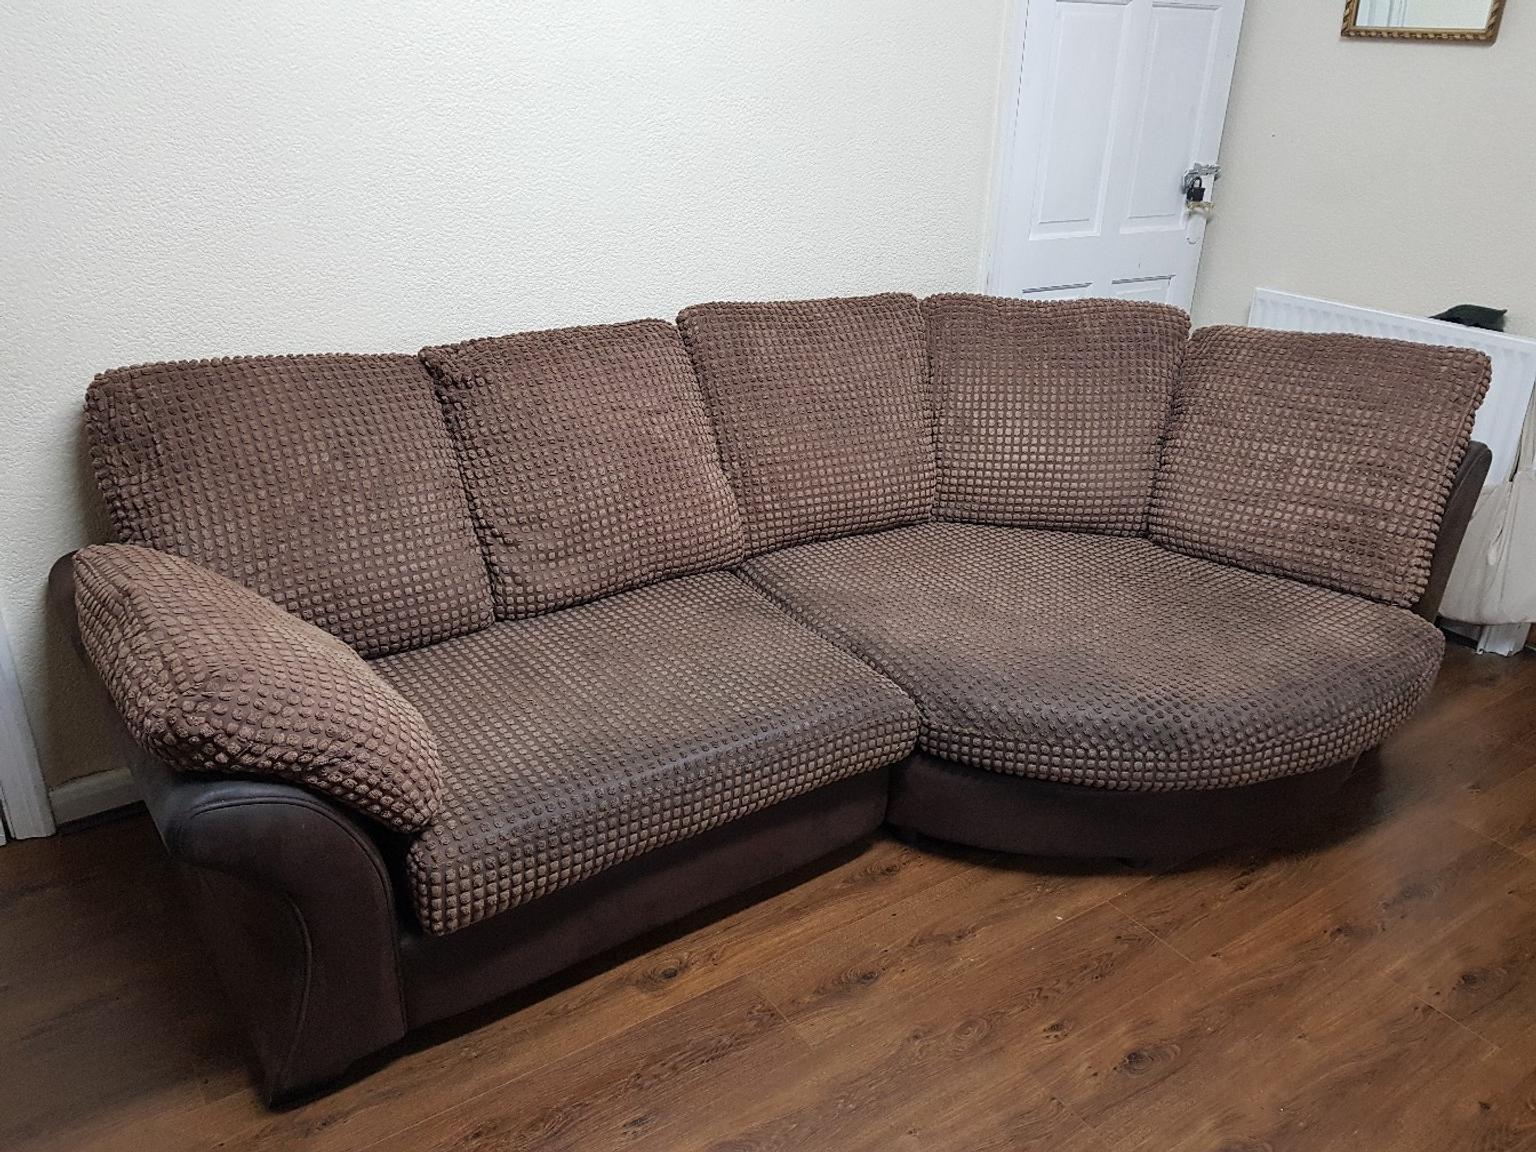 dfs sofa and cuddle chair